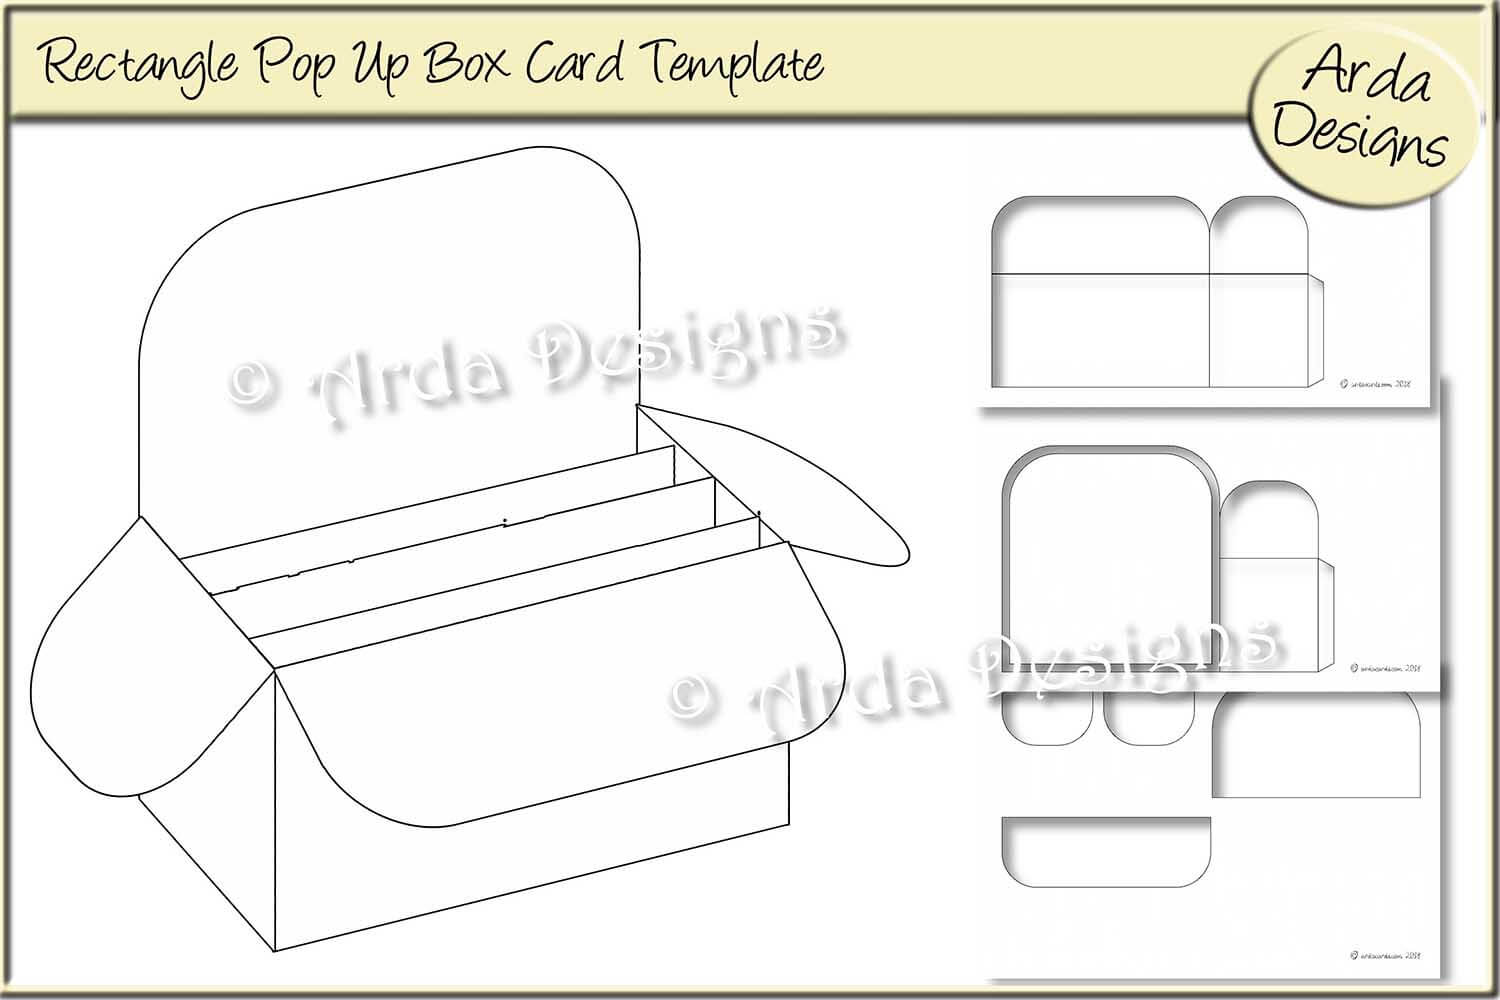 Rectangle Pop Up Box Card Cu Template Intended For Pop Up Box Card Template